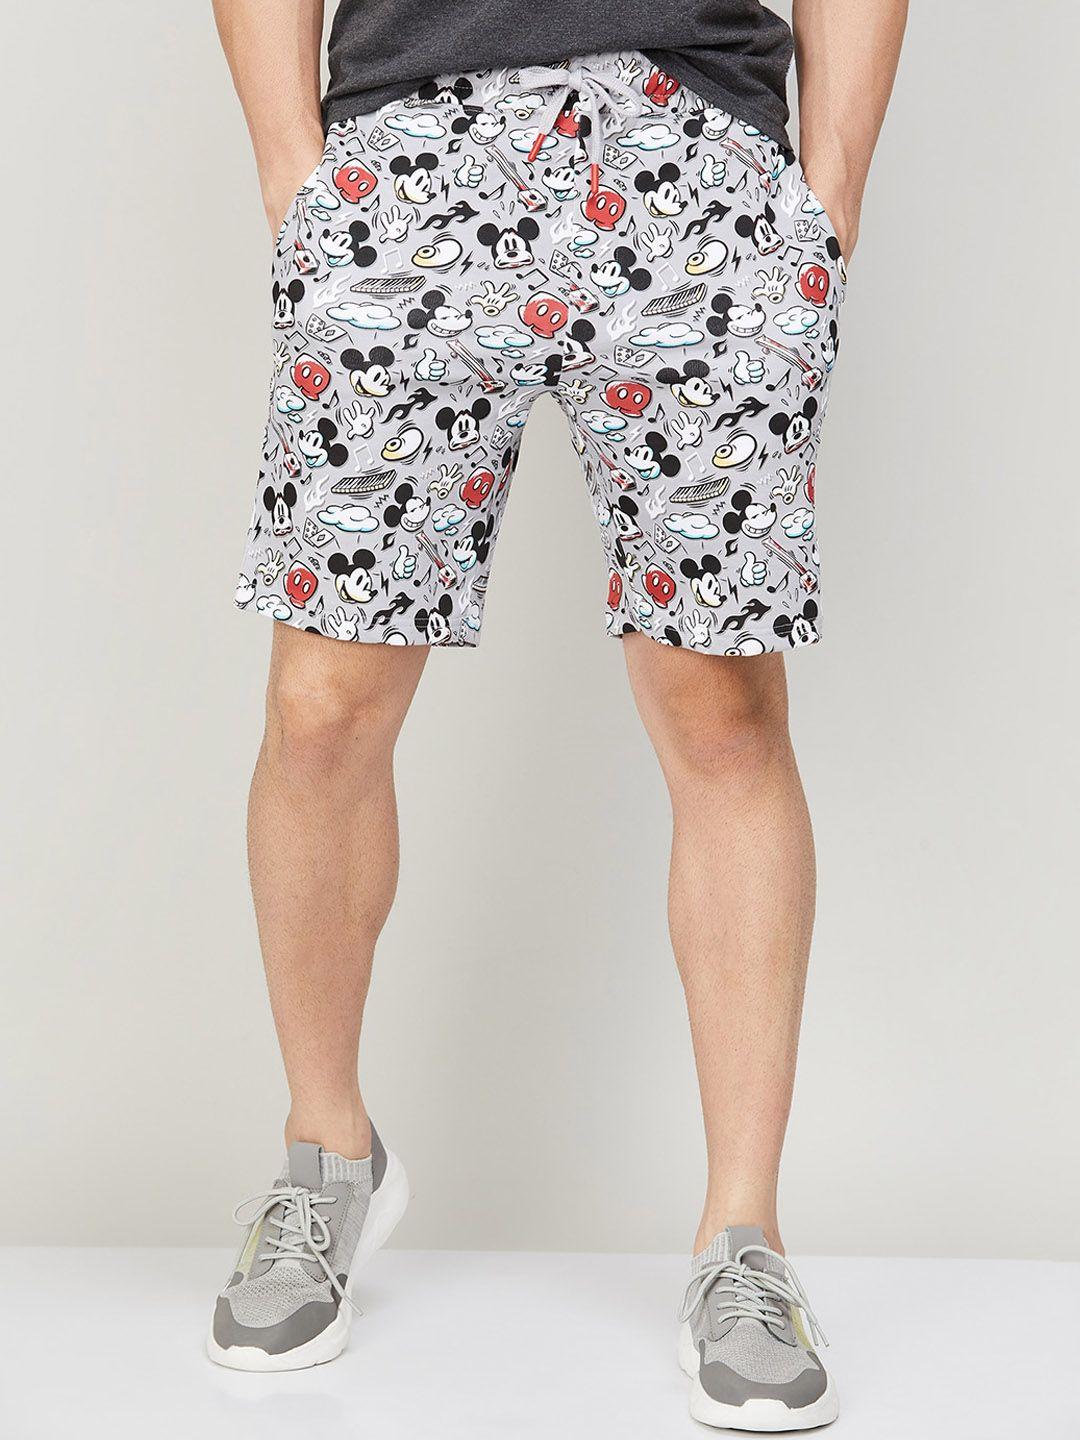 fame-forever-by-lifestyle-men-mid-rise-graphic-printed-shorts